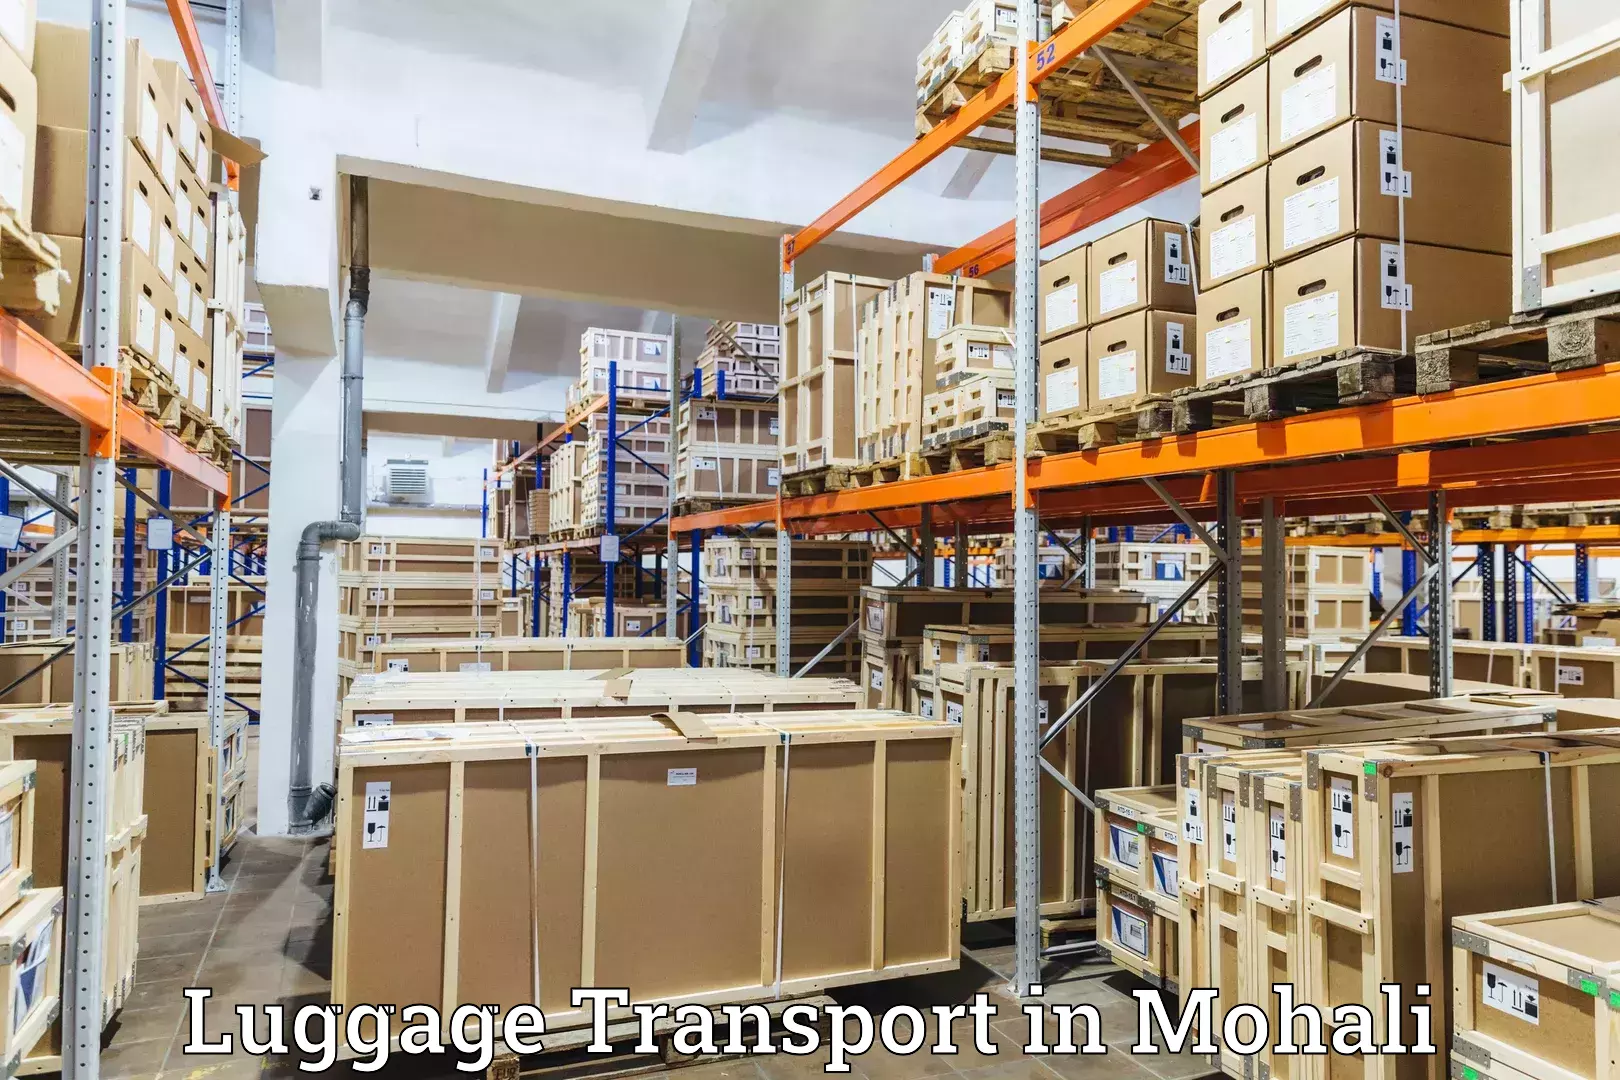 Baggage transport professionals in Mohali